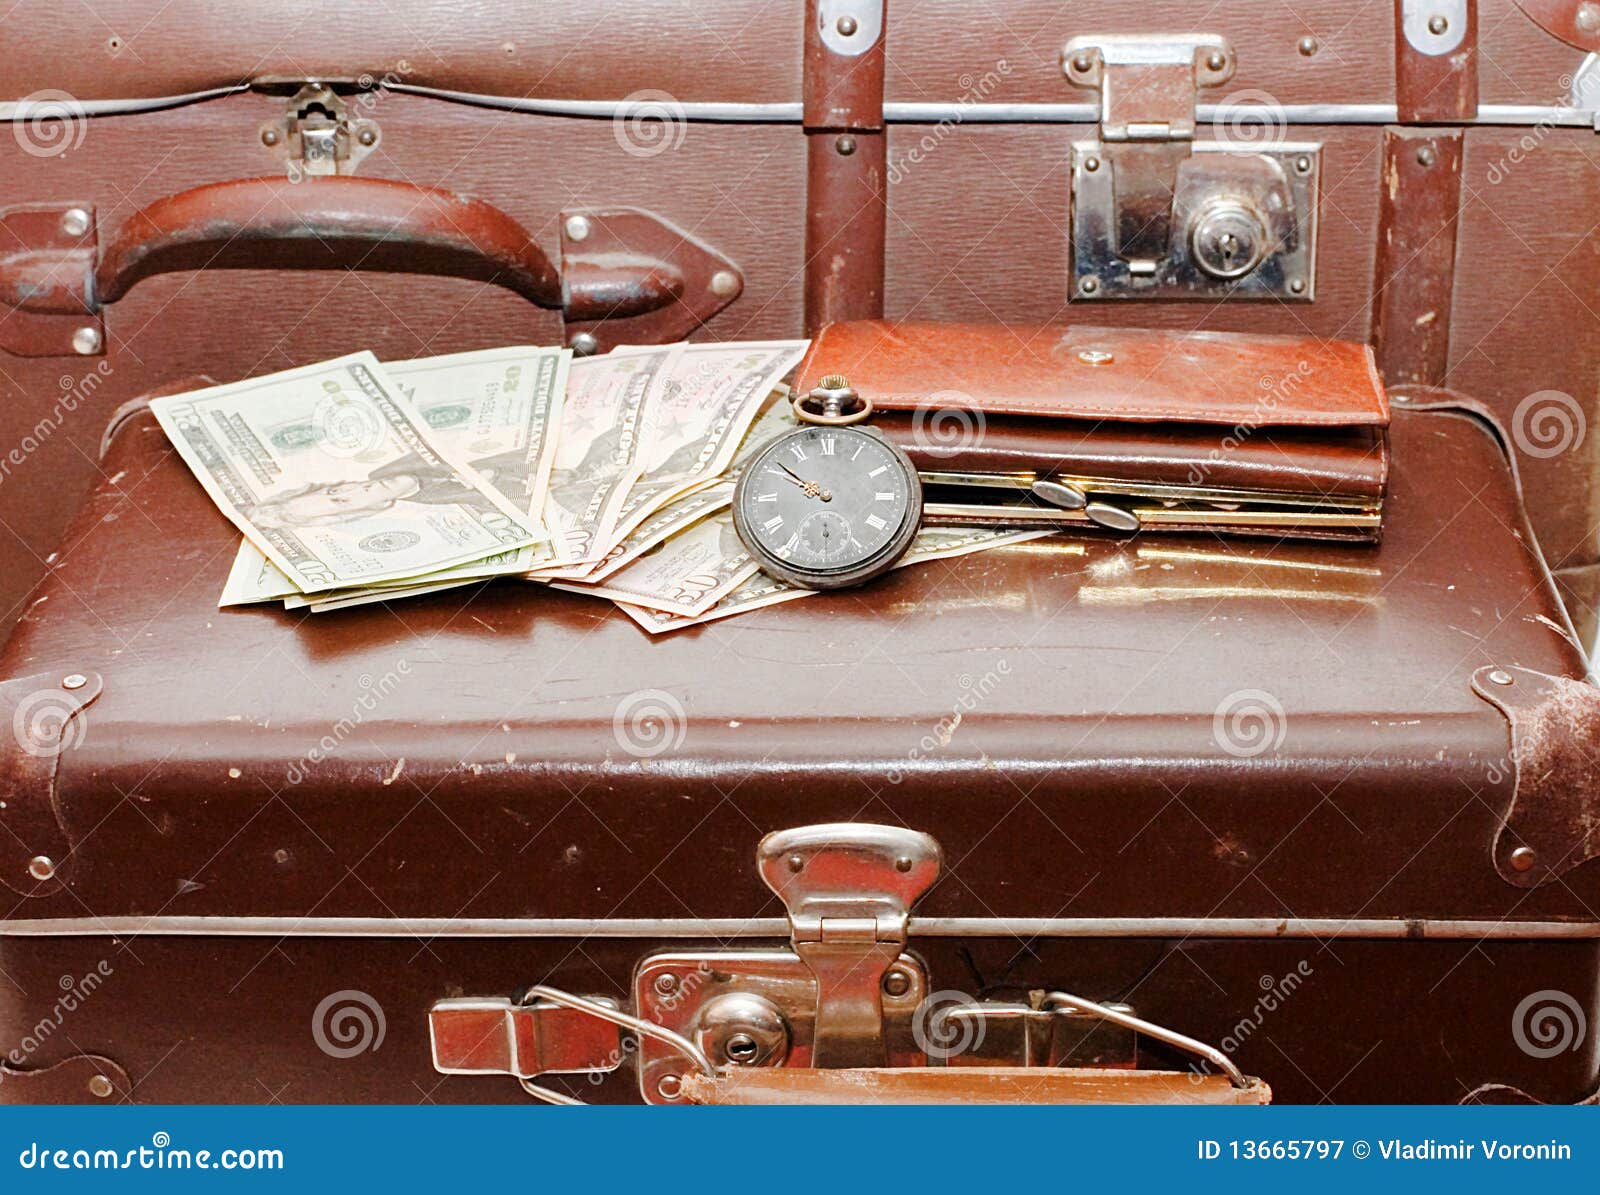 money lays on an old suitcase